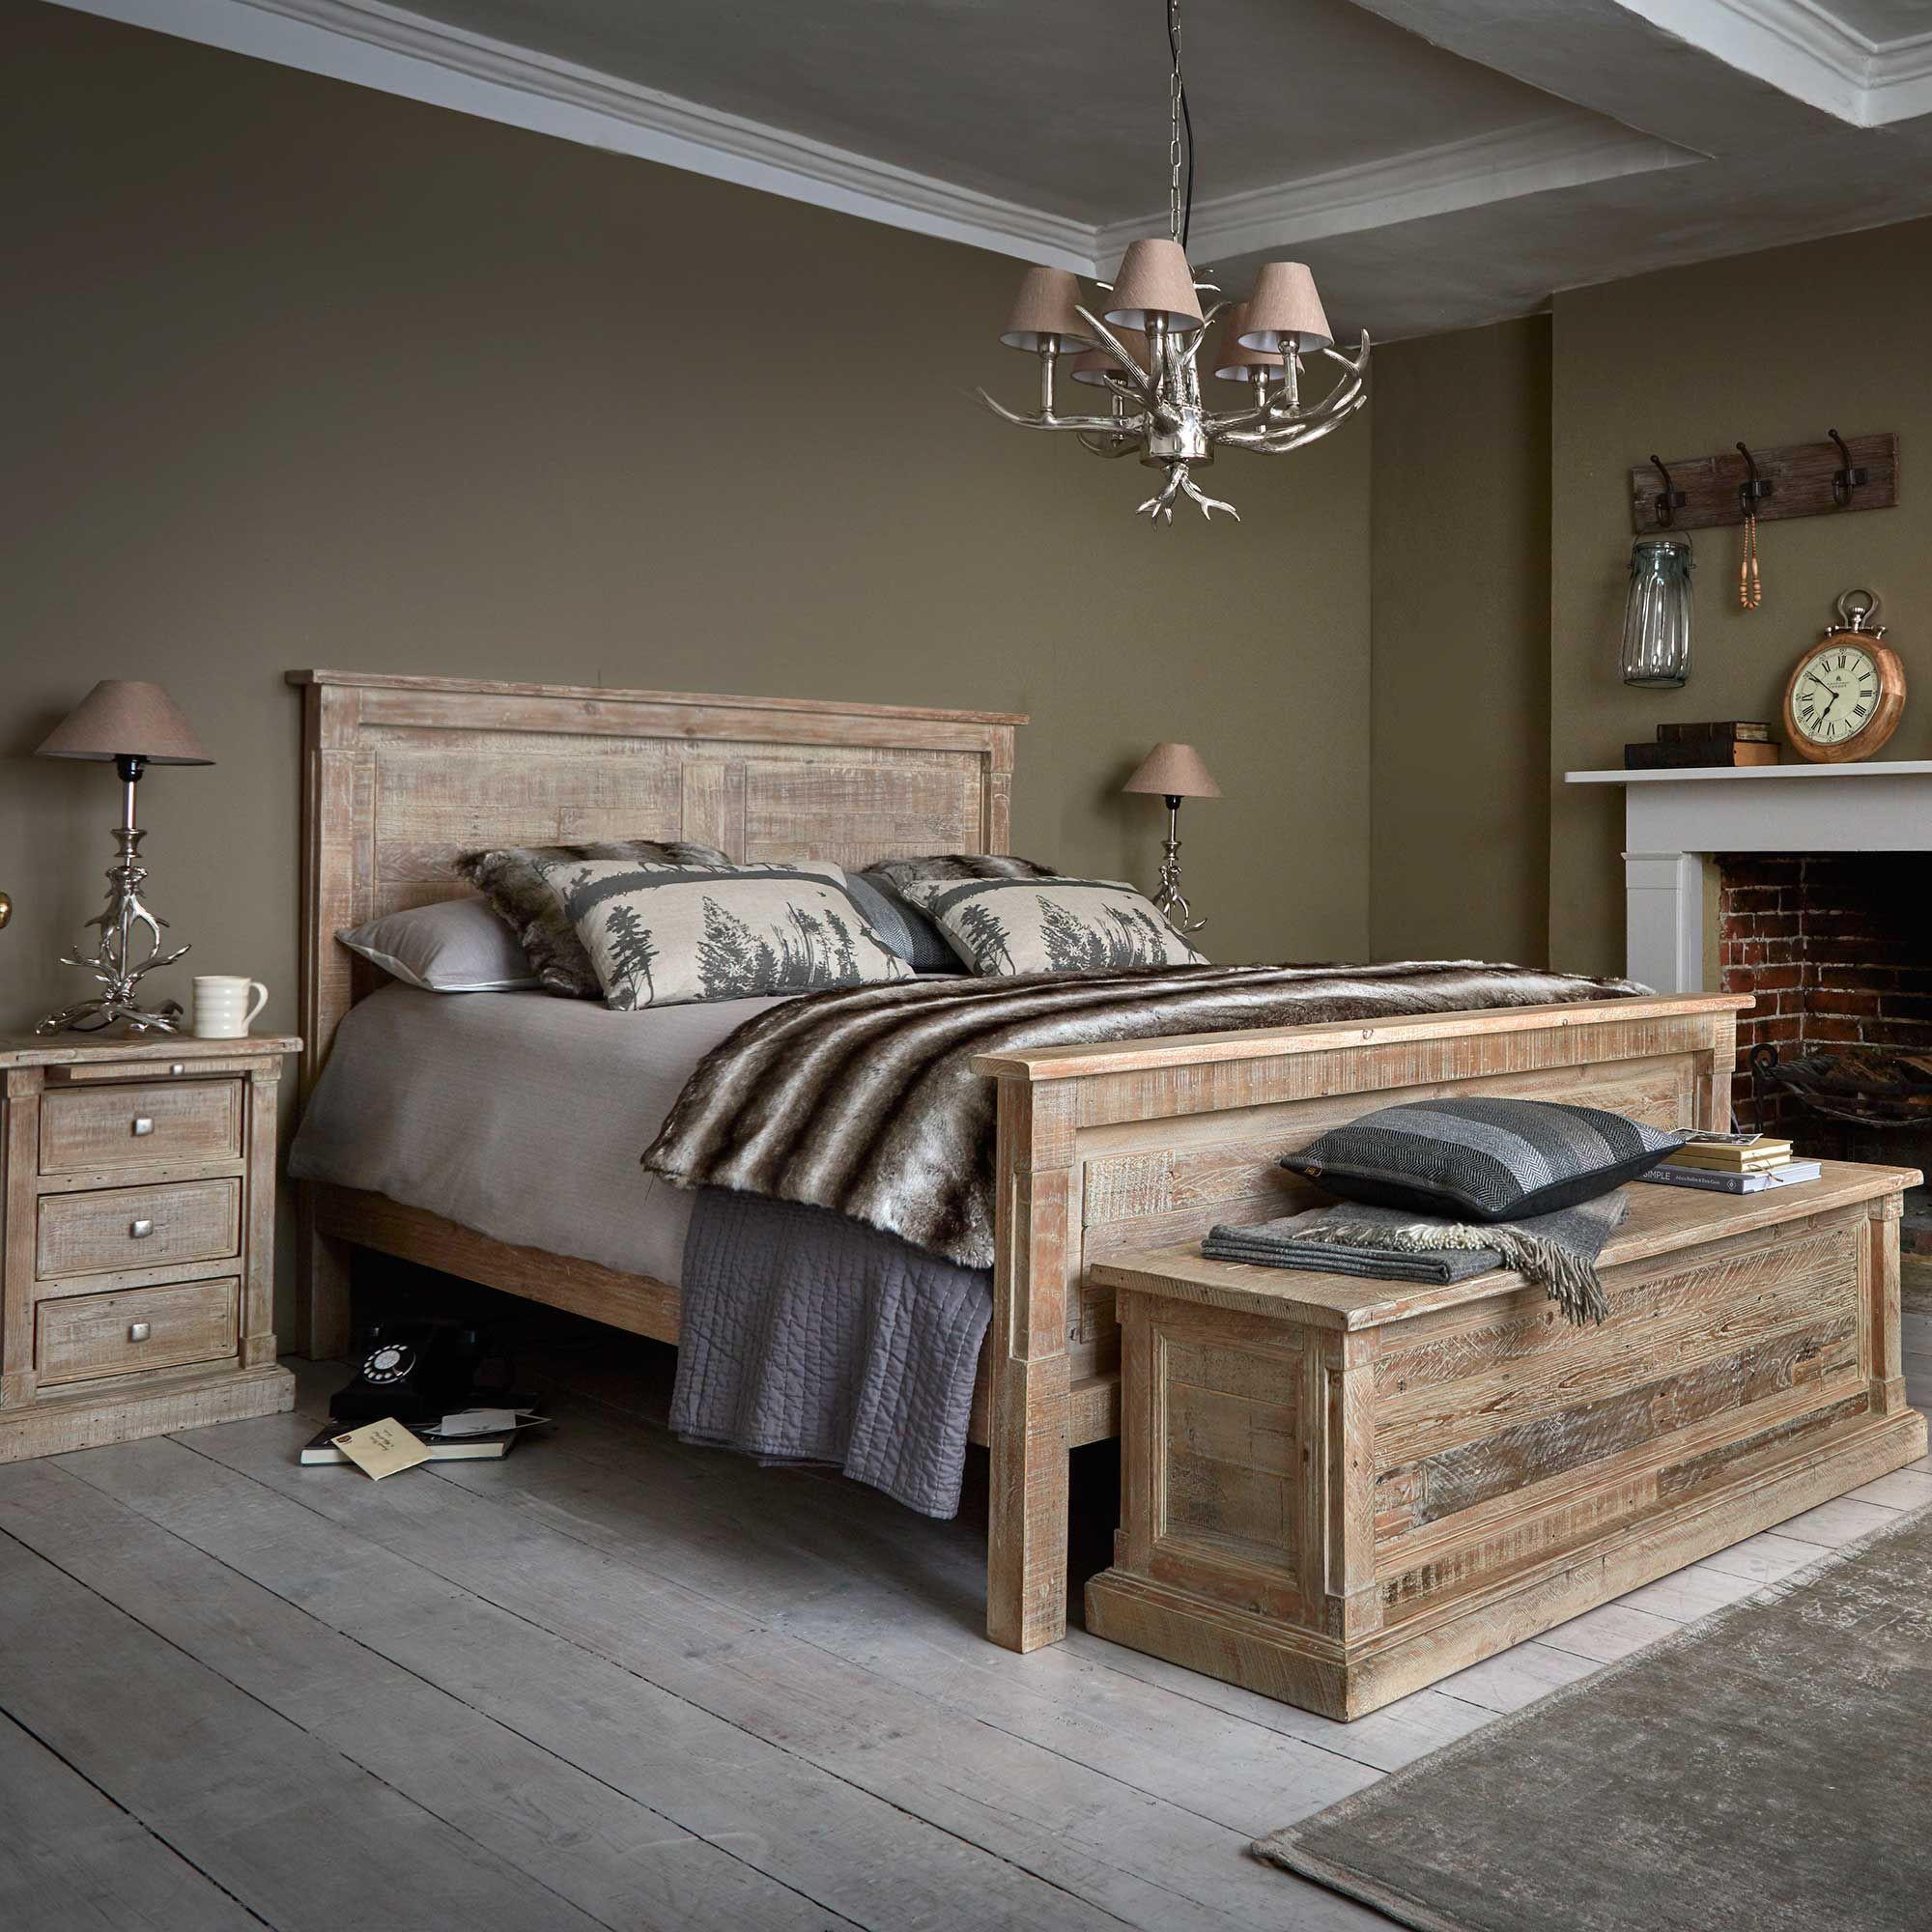 Rustic Wood Bedroom Sets
 The Austen Bed Frame is made from reclaimed wood with a